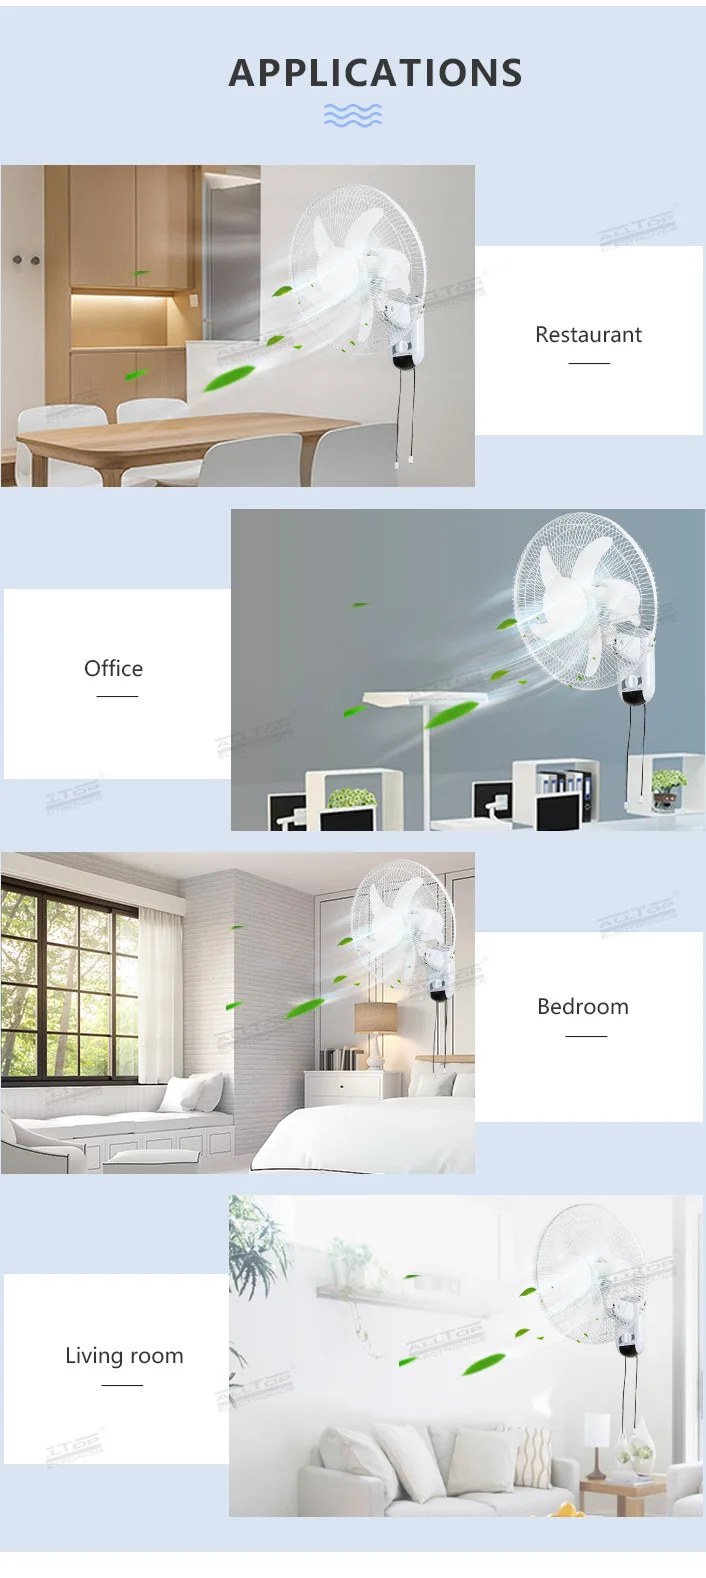 ALLTOP 16 Inch electric home ventilateur parts price mounted wall fan